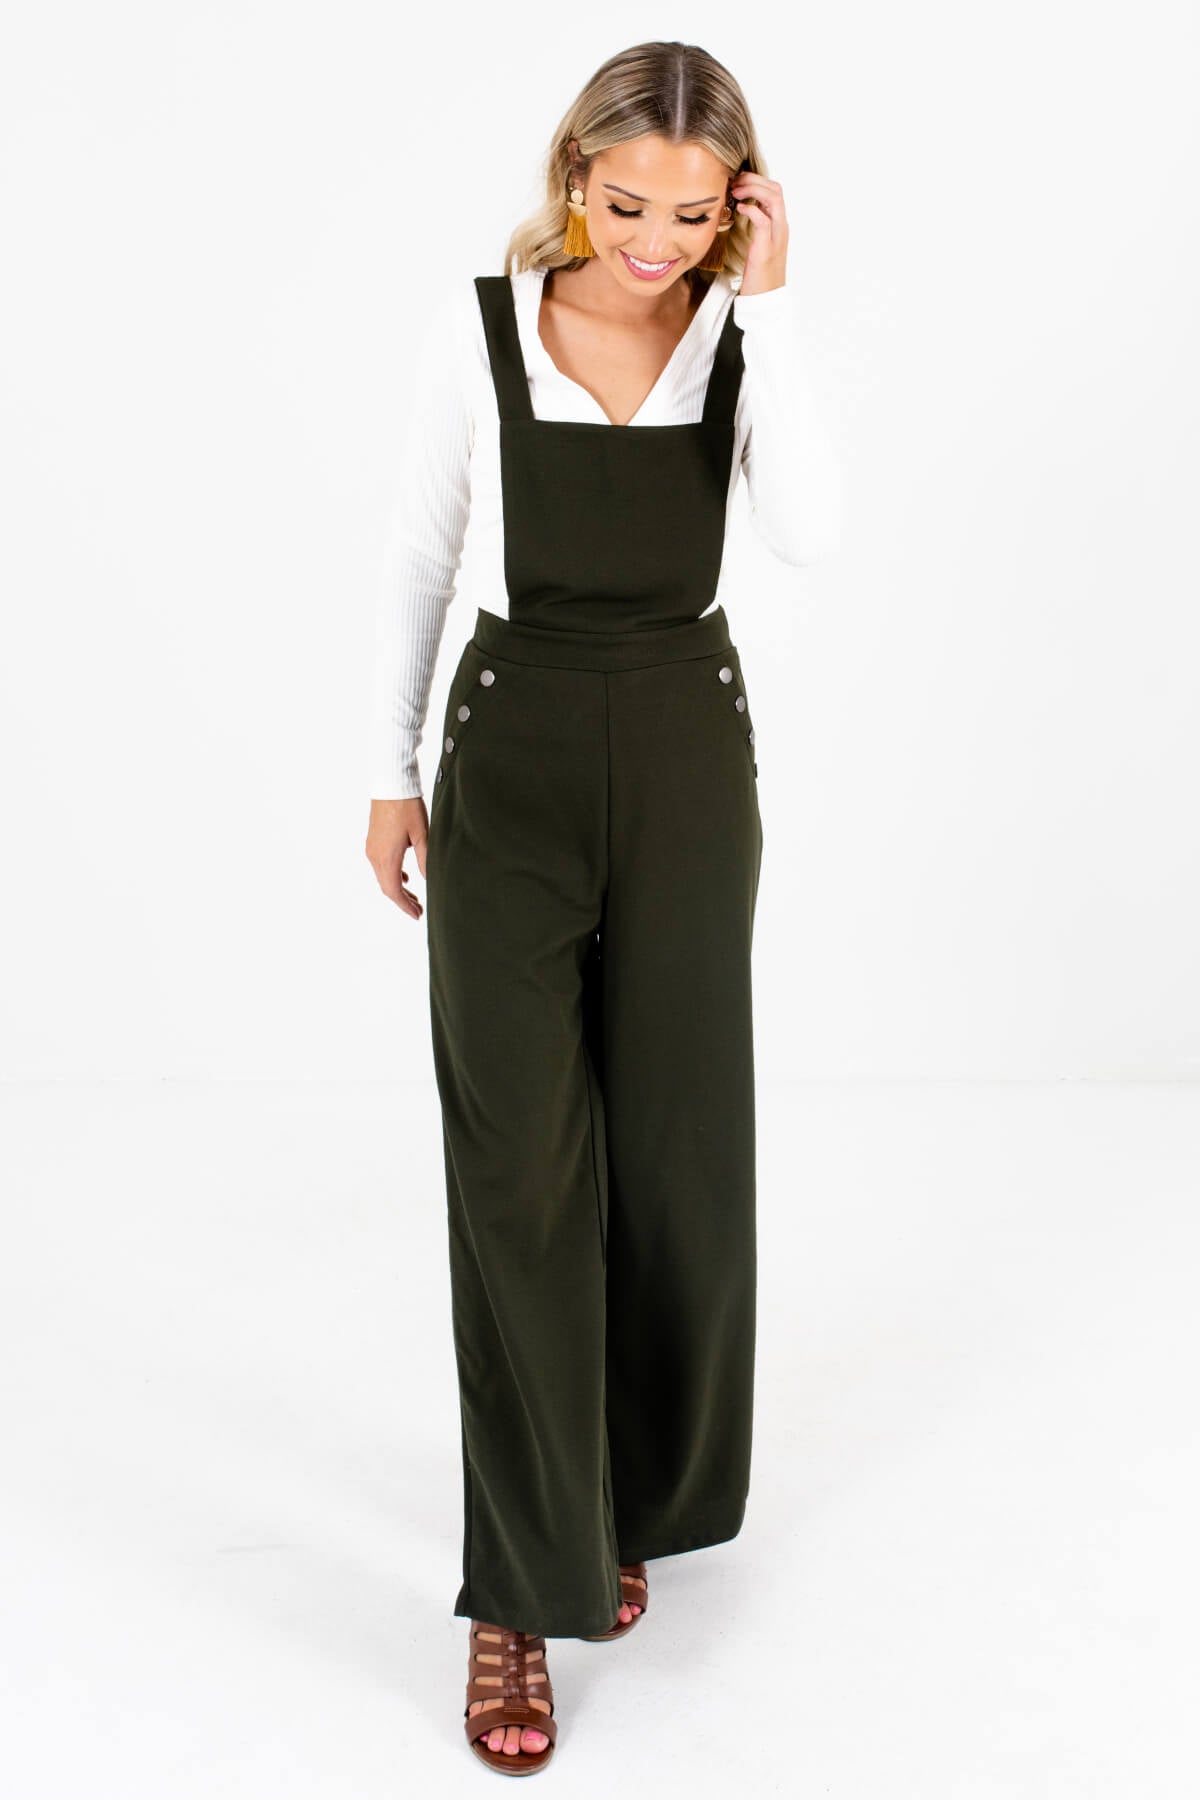 Women’s Olive Green High-Quality Textured Material Boutique Jumpsuit